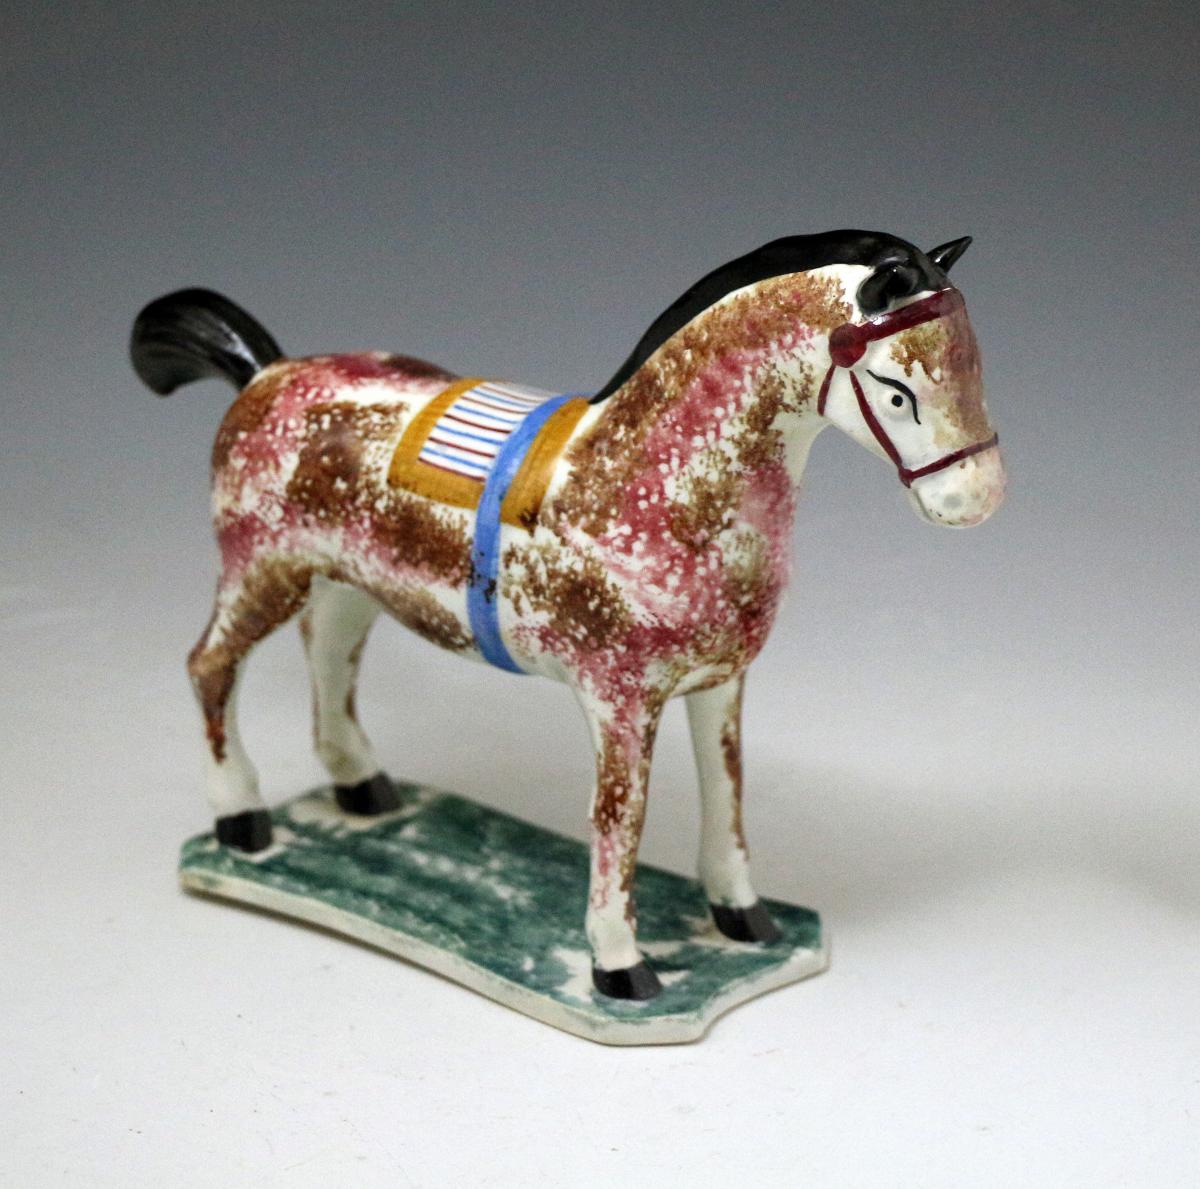 Antique English pottery pearlware figure of a horse, St Anthony’s Pottery